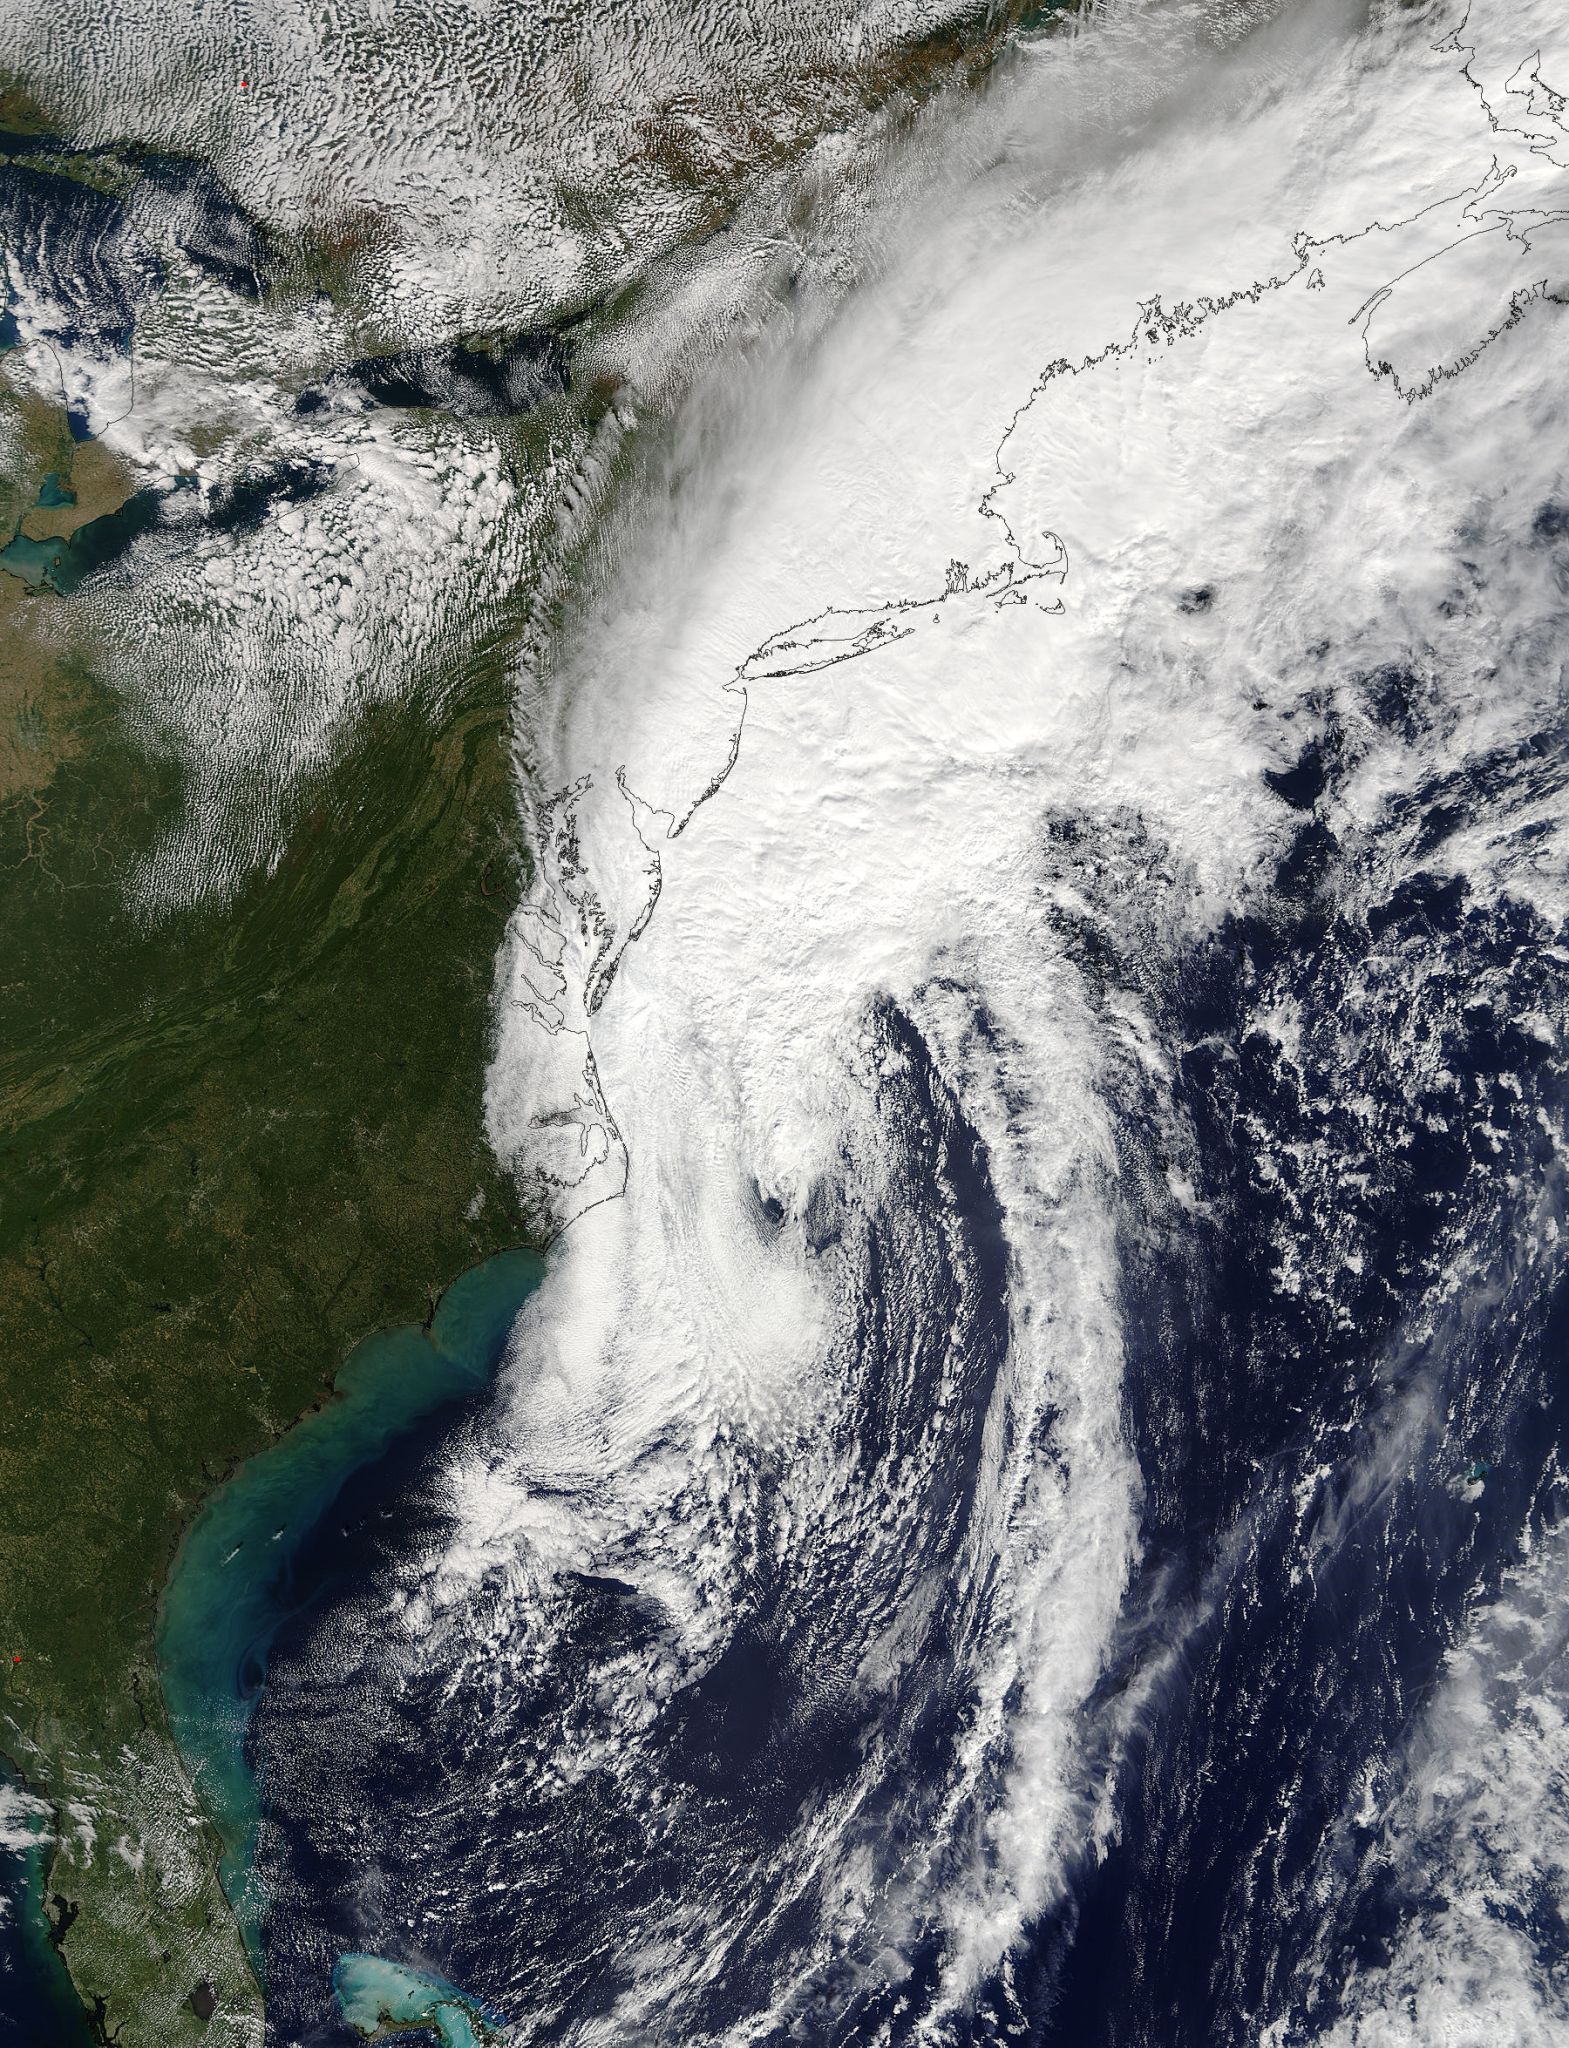 Satellite image of Hurricane Matthew, which has covered the upper Atlantic coast of the US in a big white cloud mass.